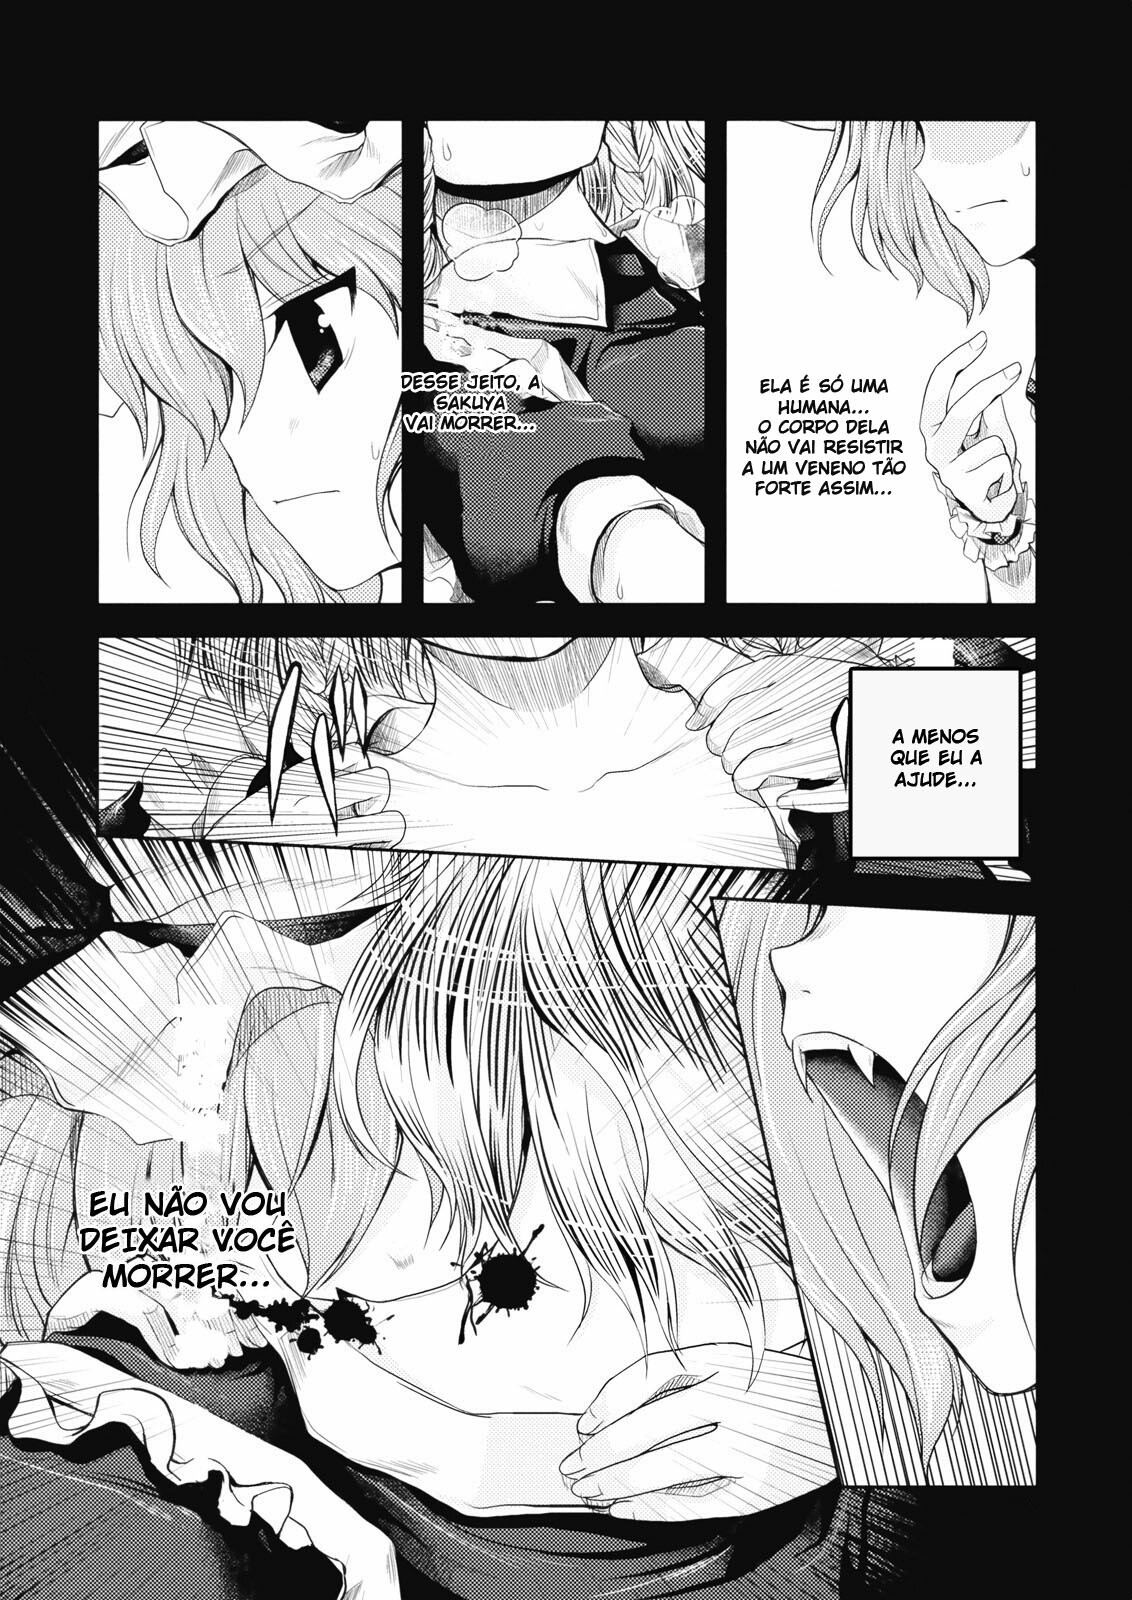 (ComiComi13) [Memoria (Tilm)] Bloody Blood (Touhou Project) [Portuguese-BR] page 15 full